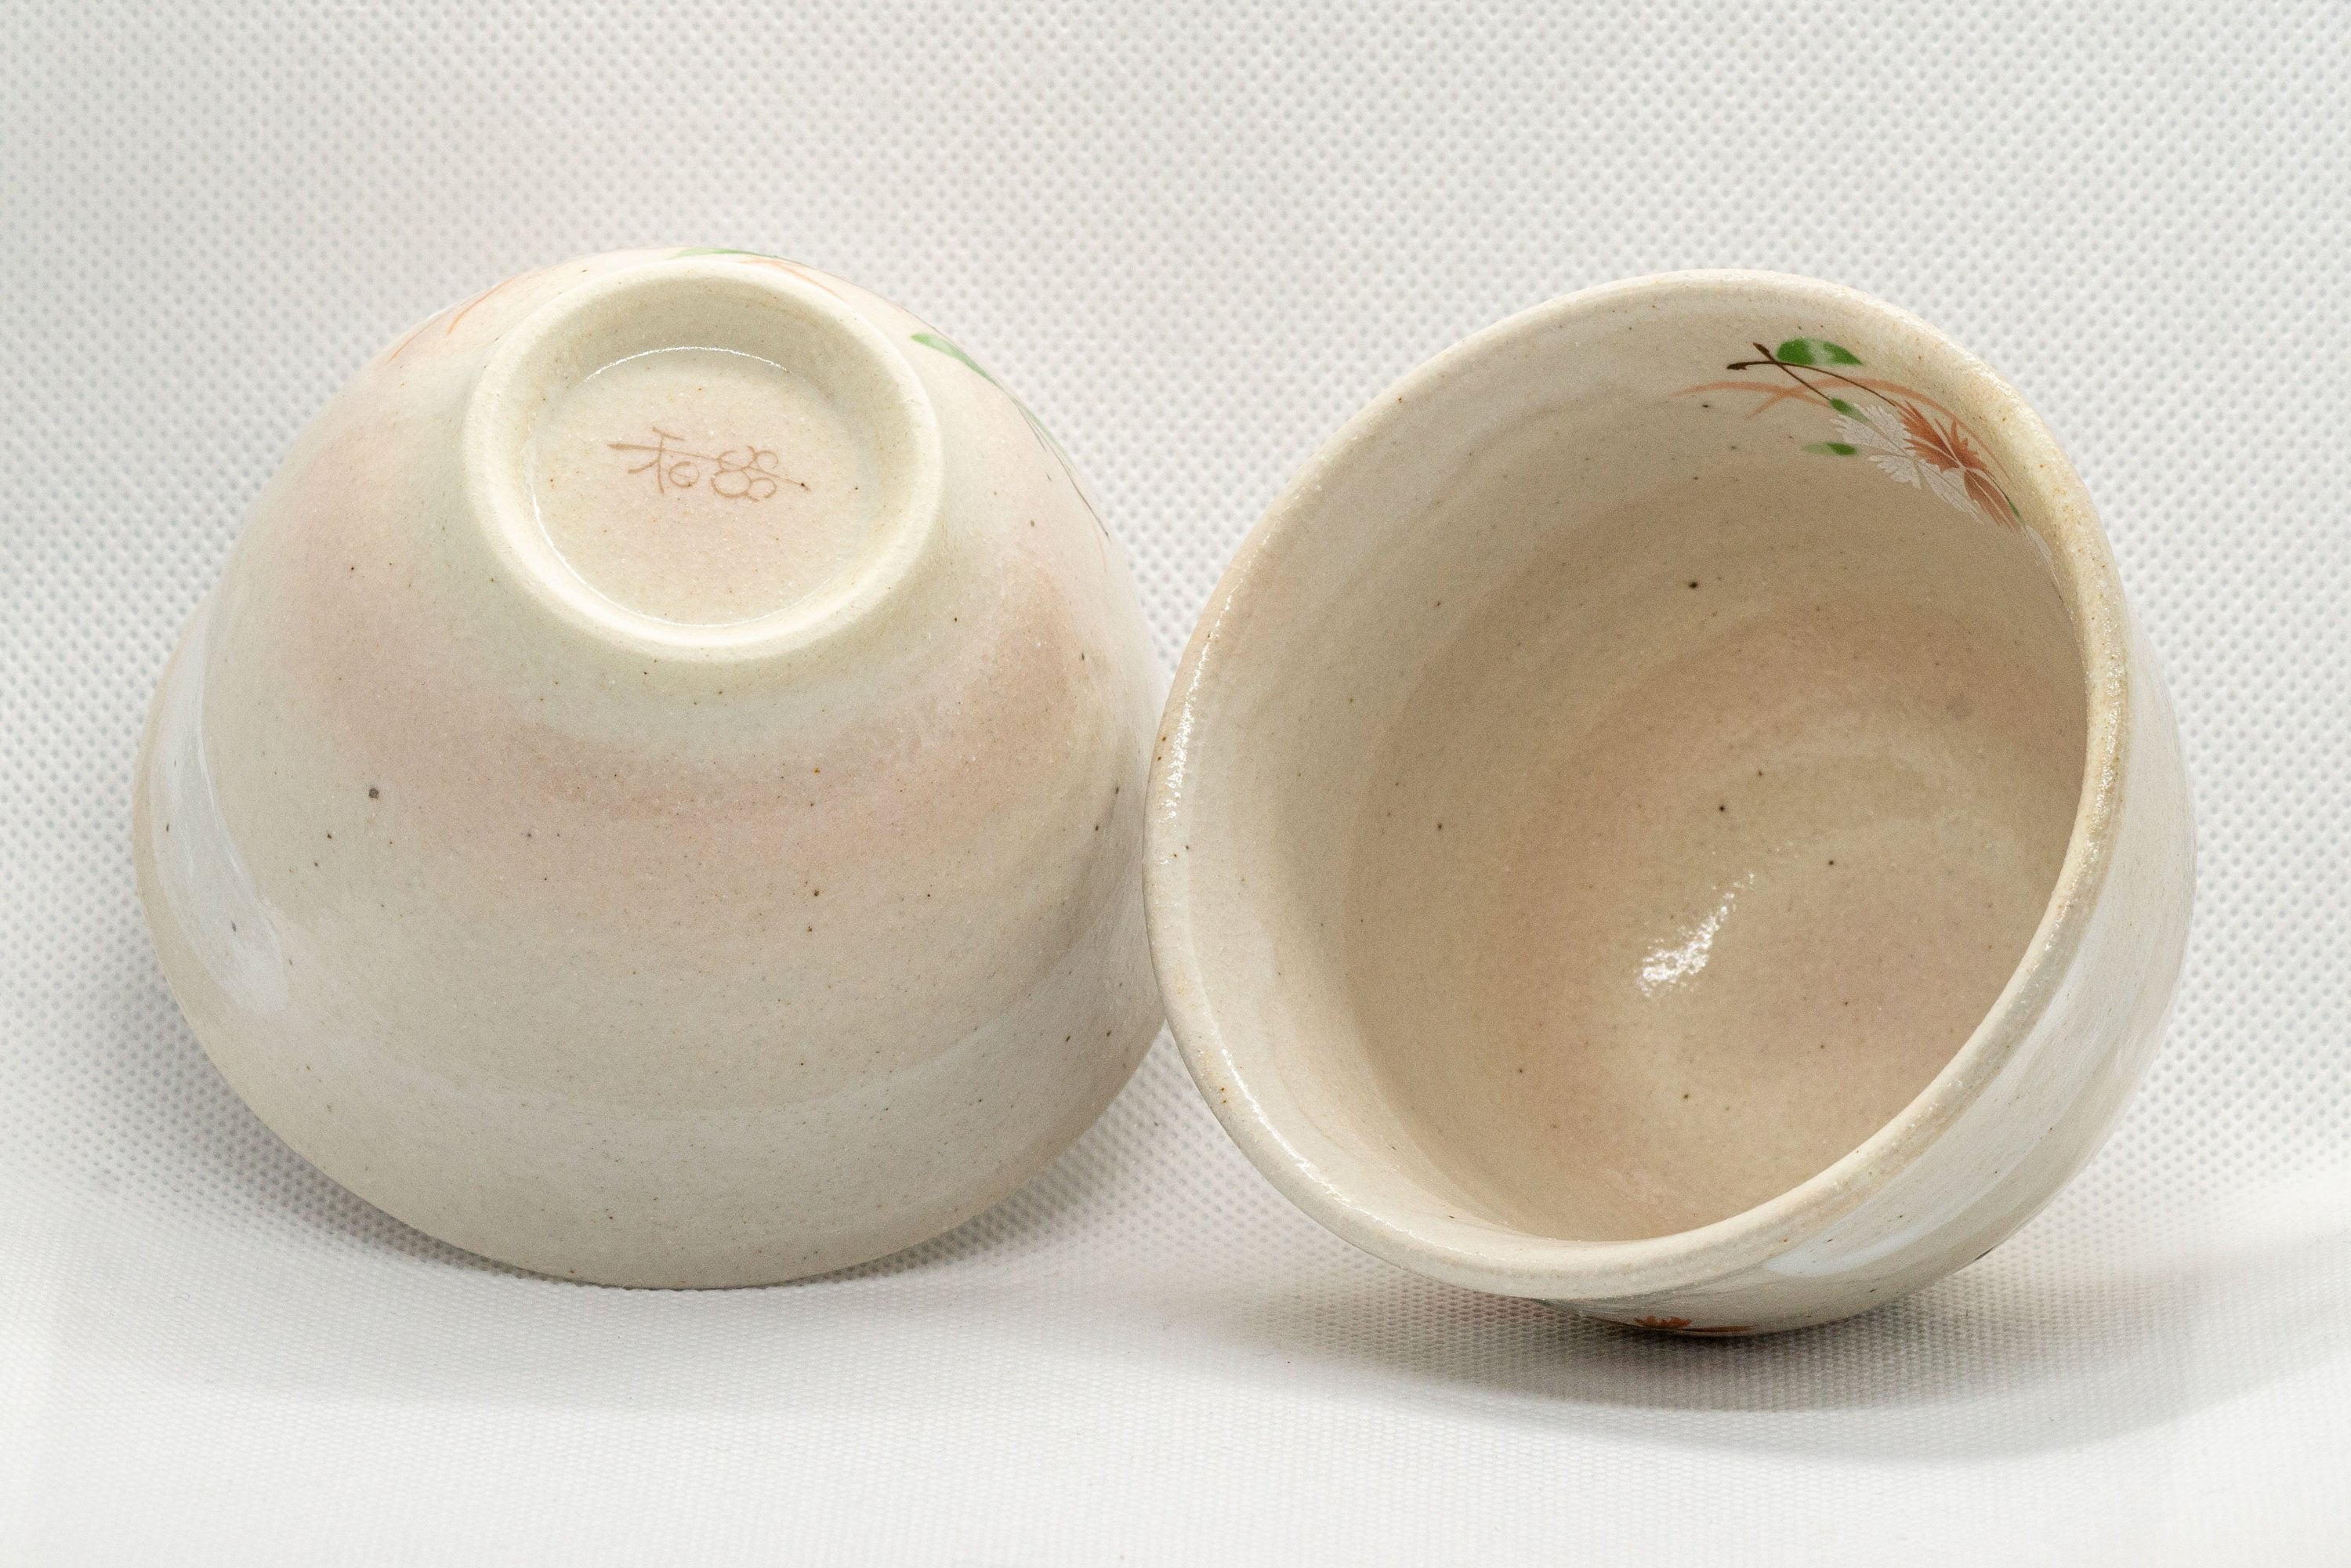 Japanese Teacups - Pair of Beige Floral Yunomi with Saucers - 150ml